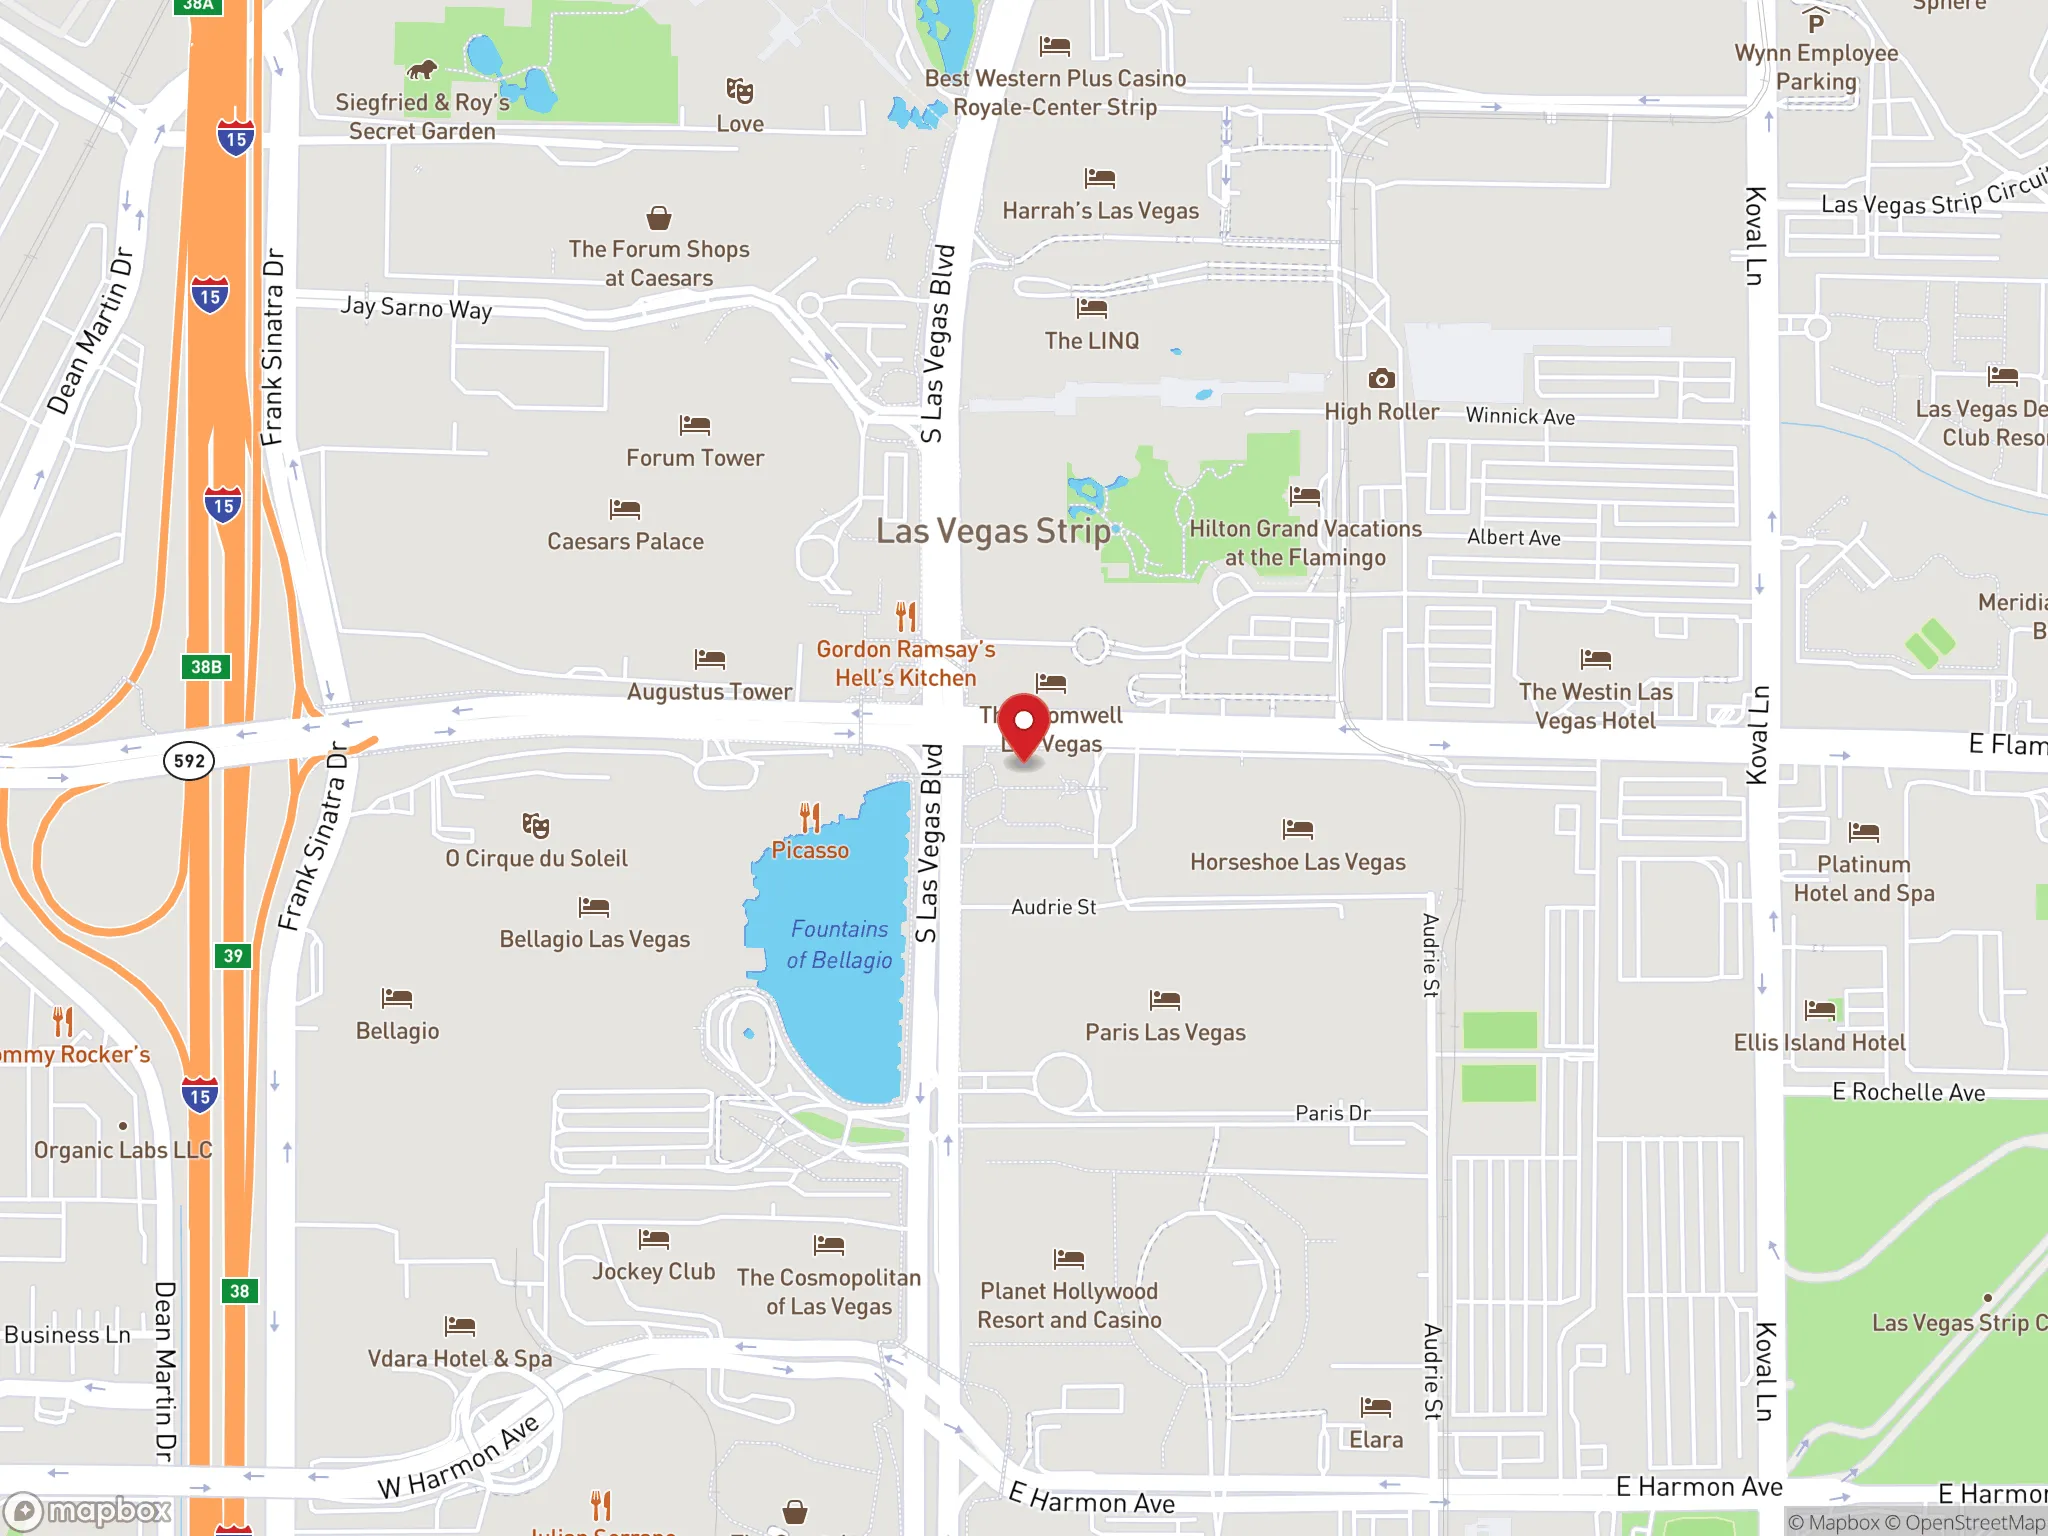 Map showing the location of a Dave's Hot Chicken restaurant on South Las Vegas Boulevard in Las Vegas, Nevada.